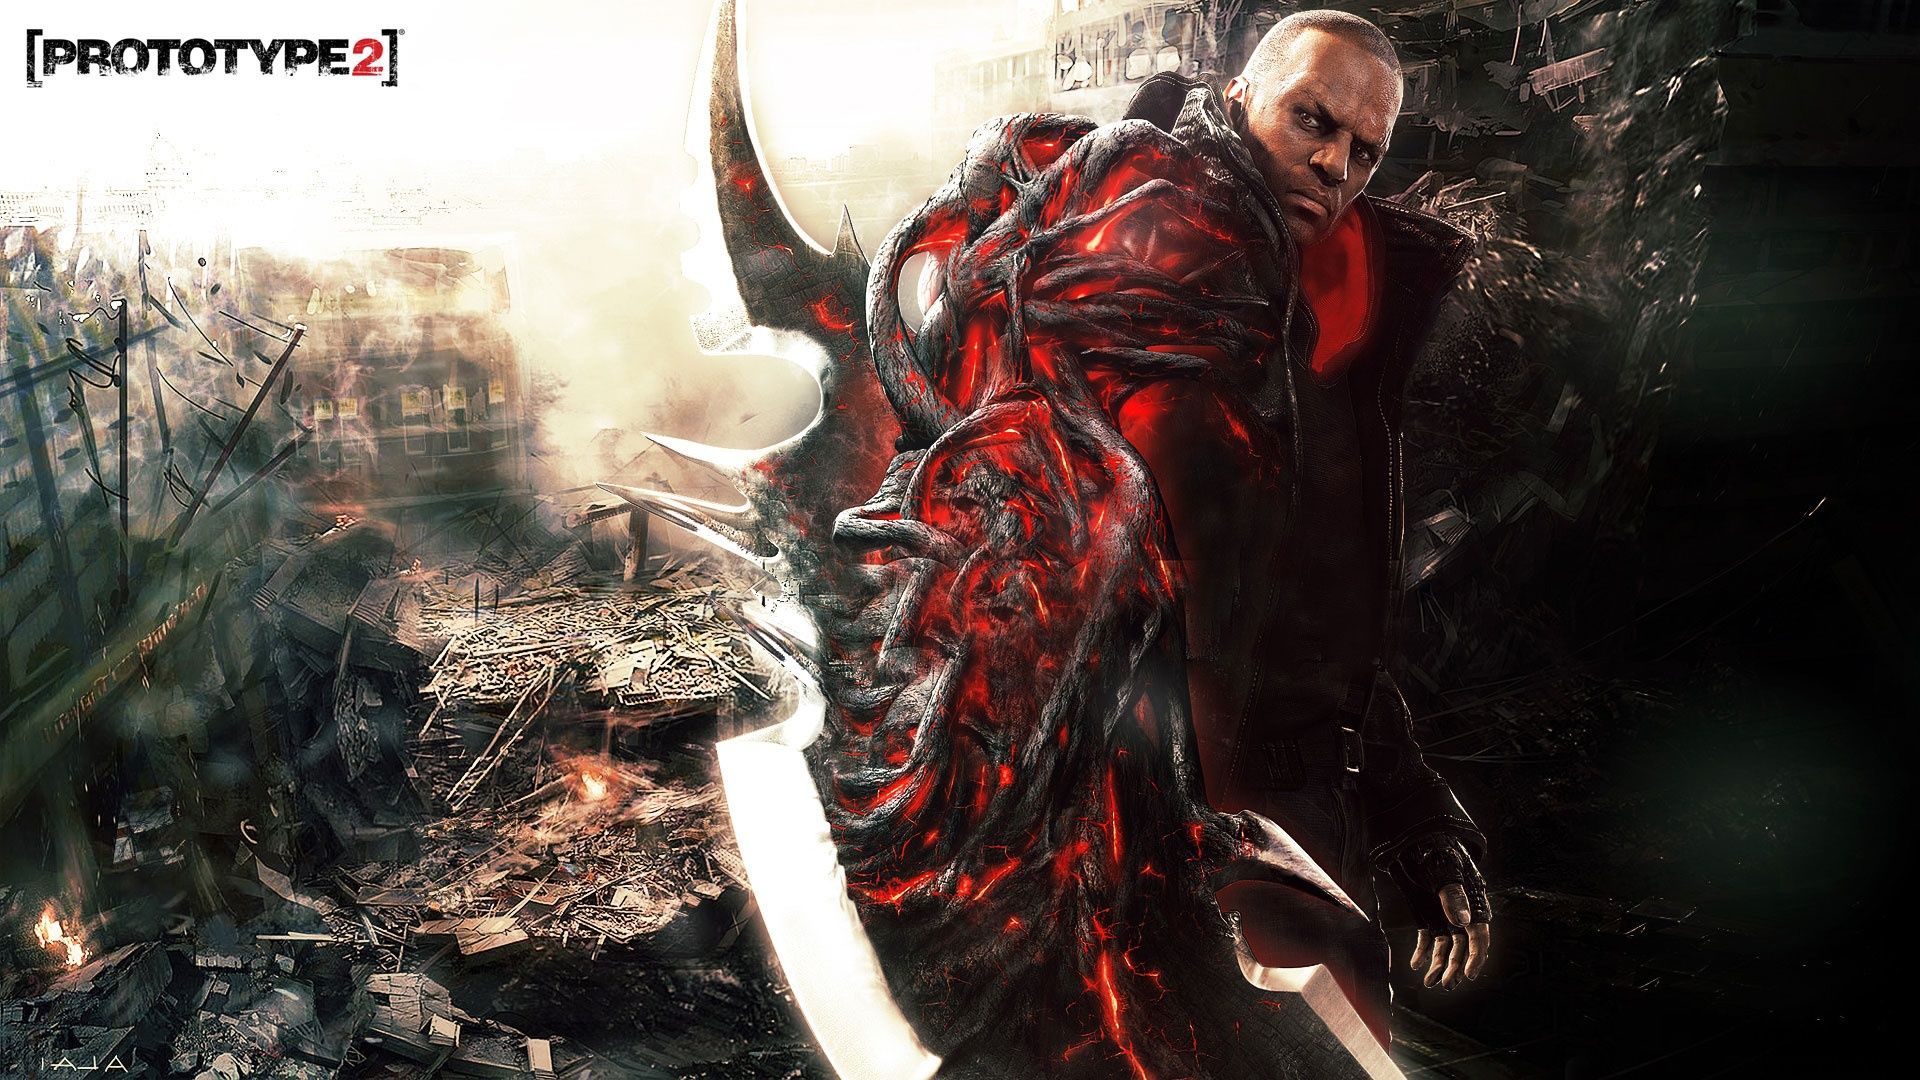 Prototype 2 Game Wallpapers | HD Wallpapers